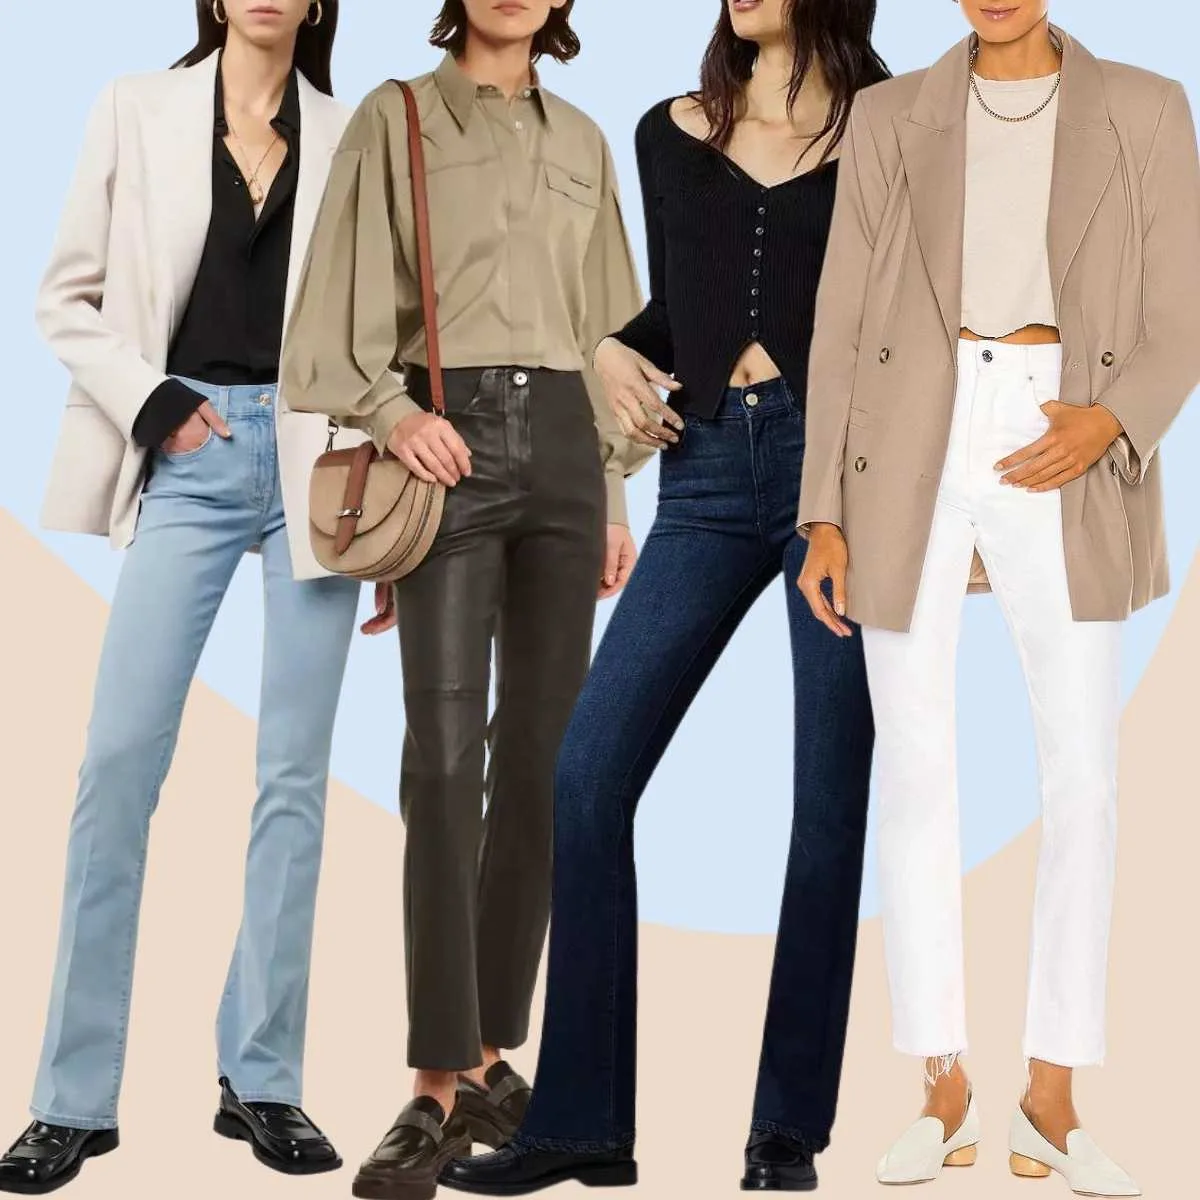 Collage of 4 women wearing loafers with bootcut jeans outfits.